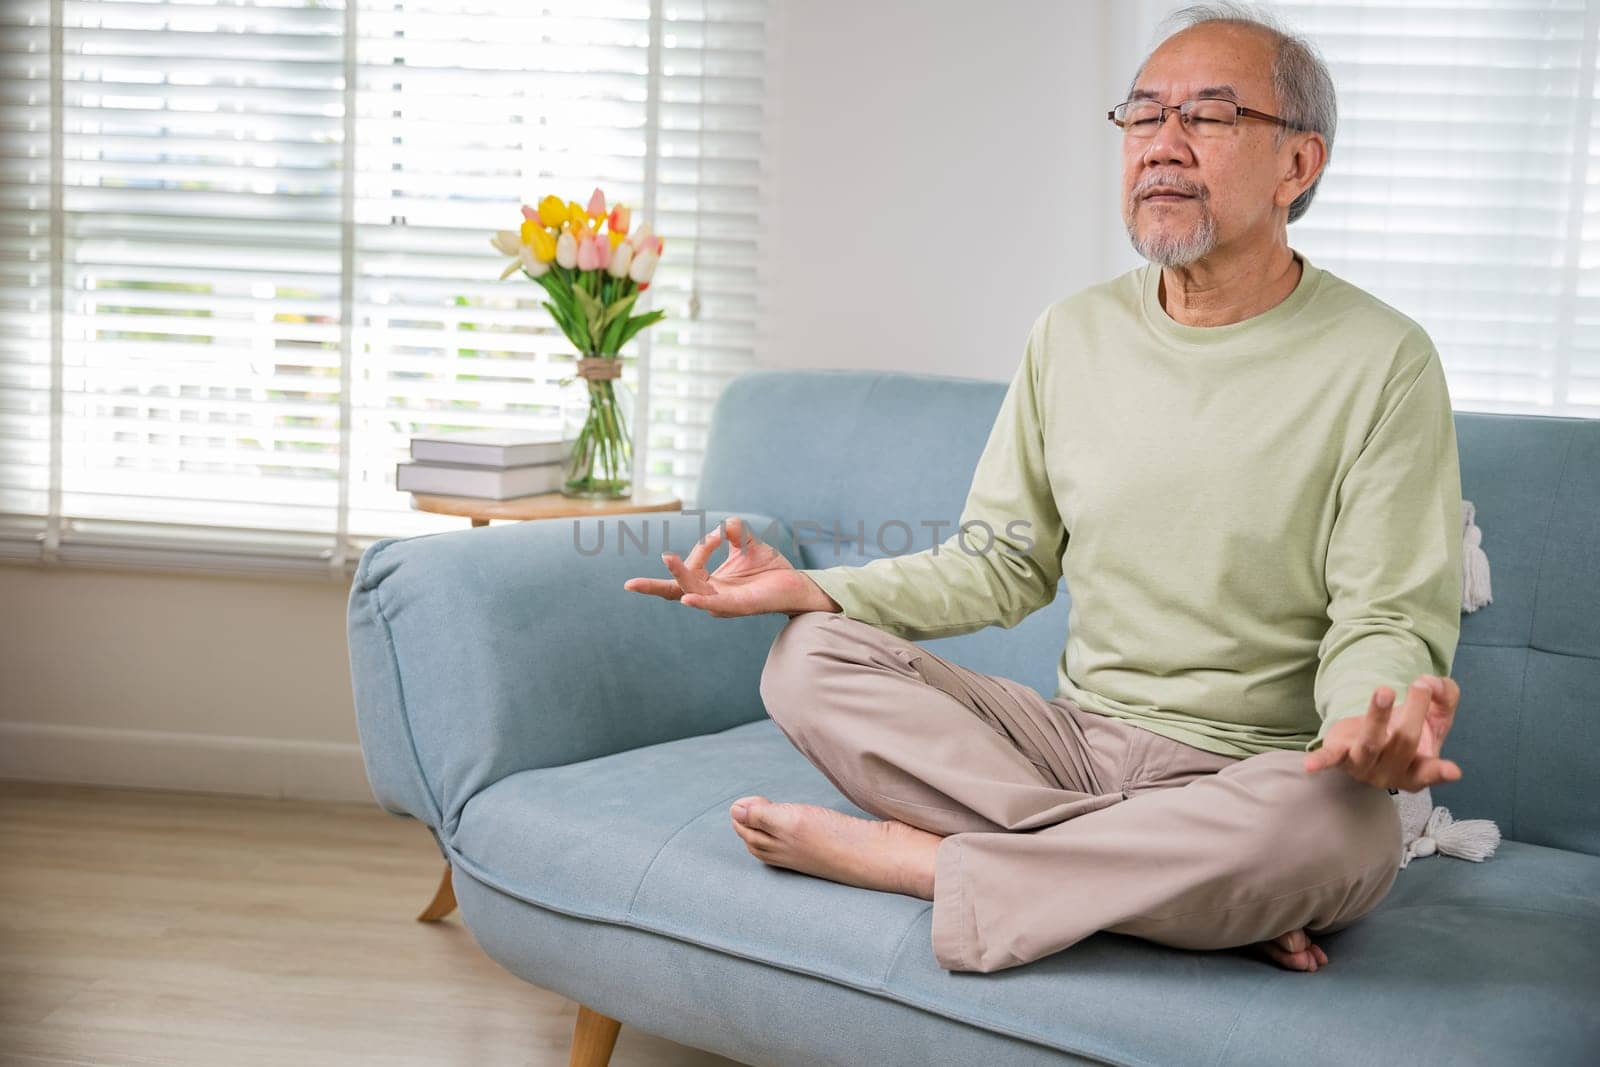 Lifestyle senior man sitting on sofa in living room holding hands in mudra practicing home yoga in lotus pose, Elderly relaxed man do physical exercises following healthy on stress free weekend